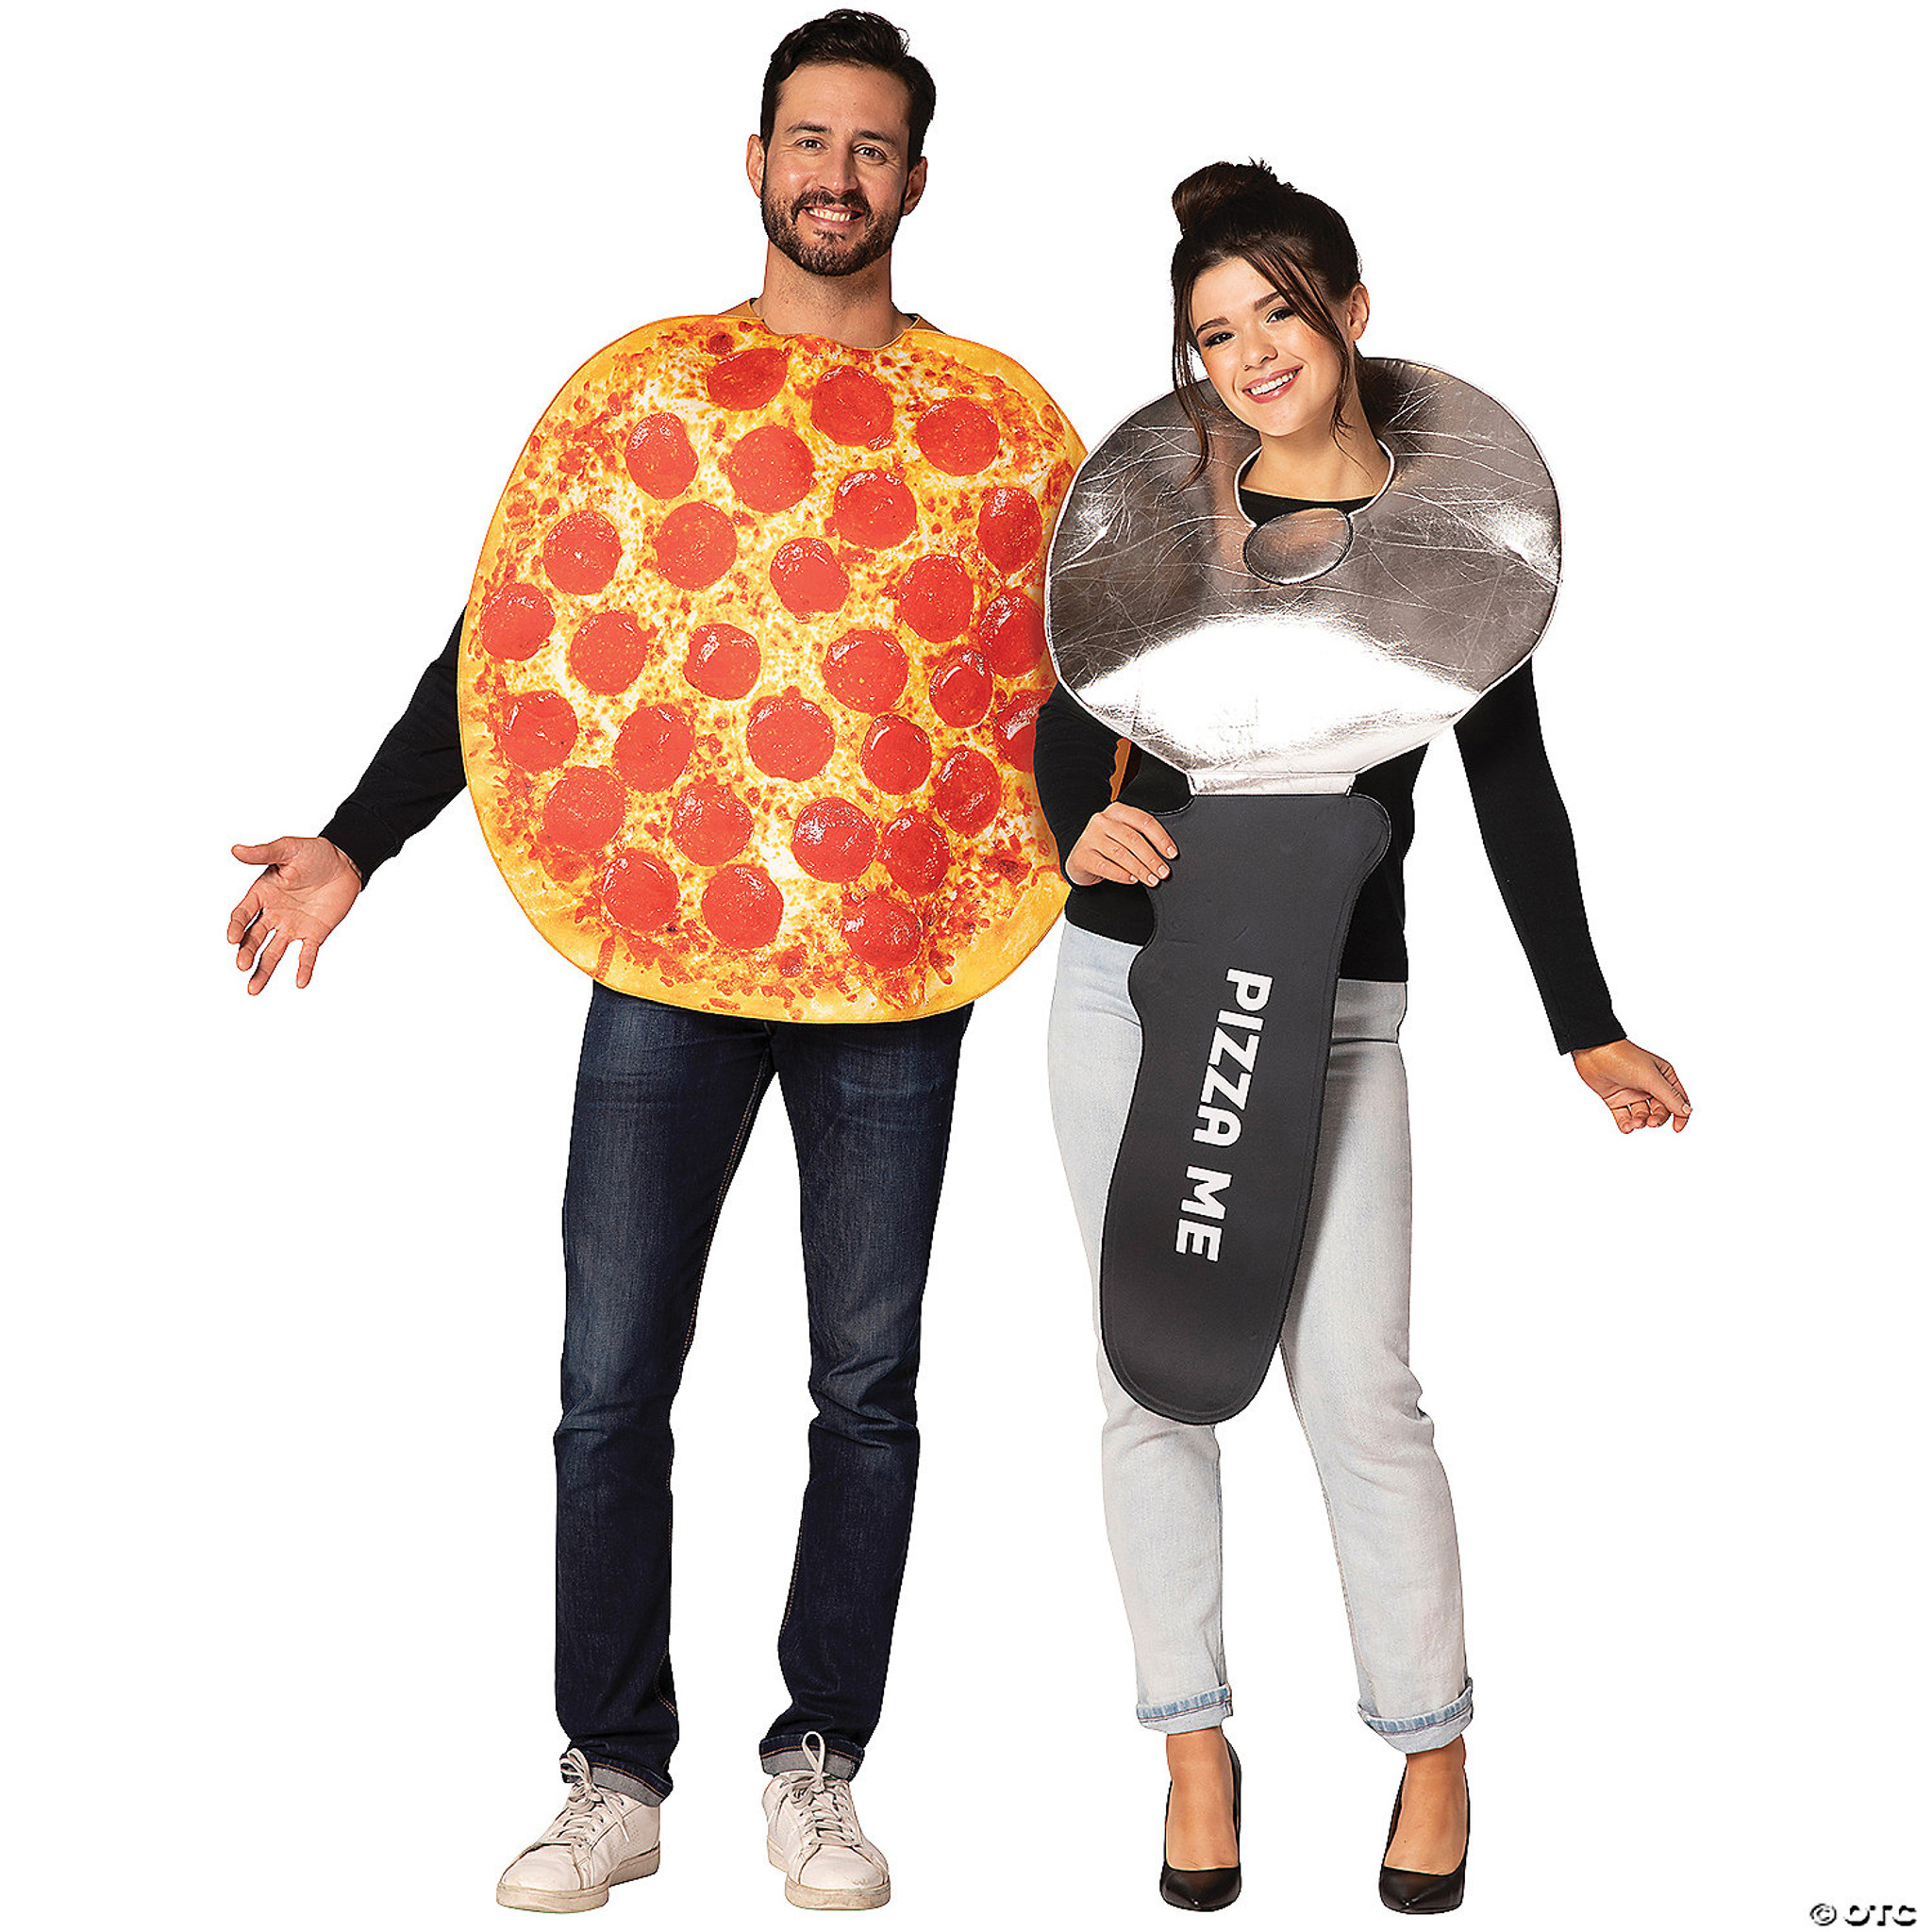 Pepperoni Pizza & Pizza Cutter Adult Couples Costume - Halloween FX Props